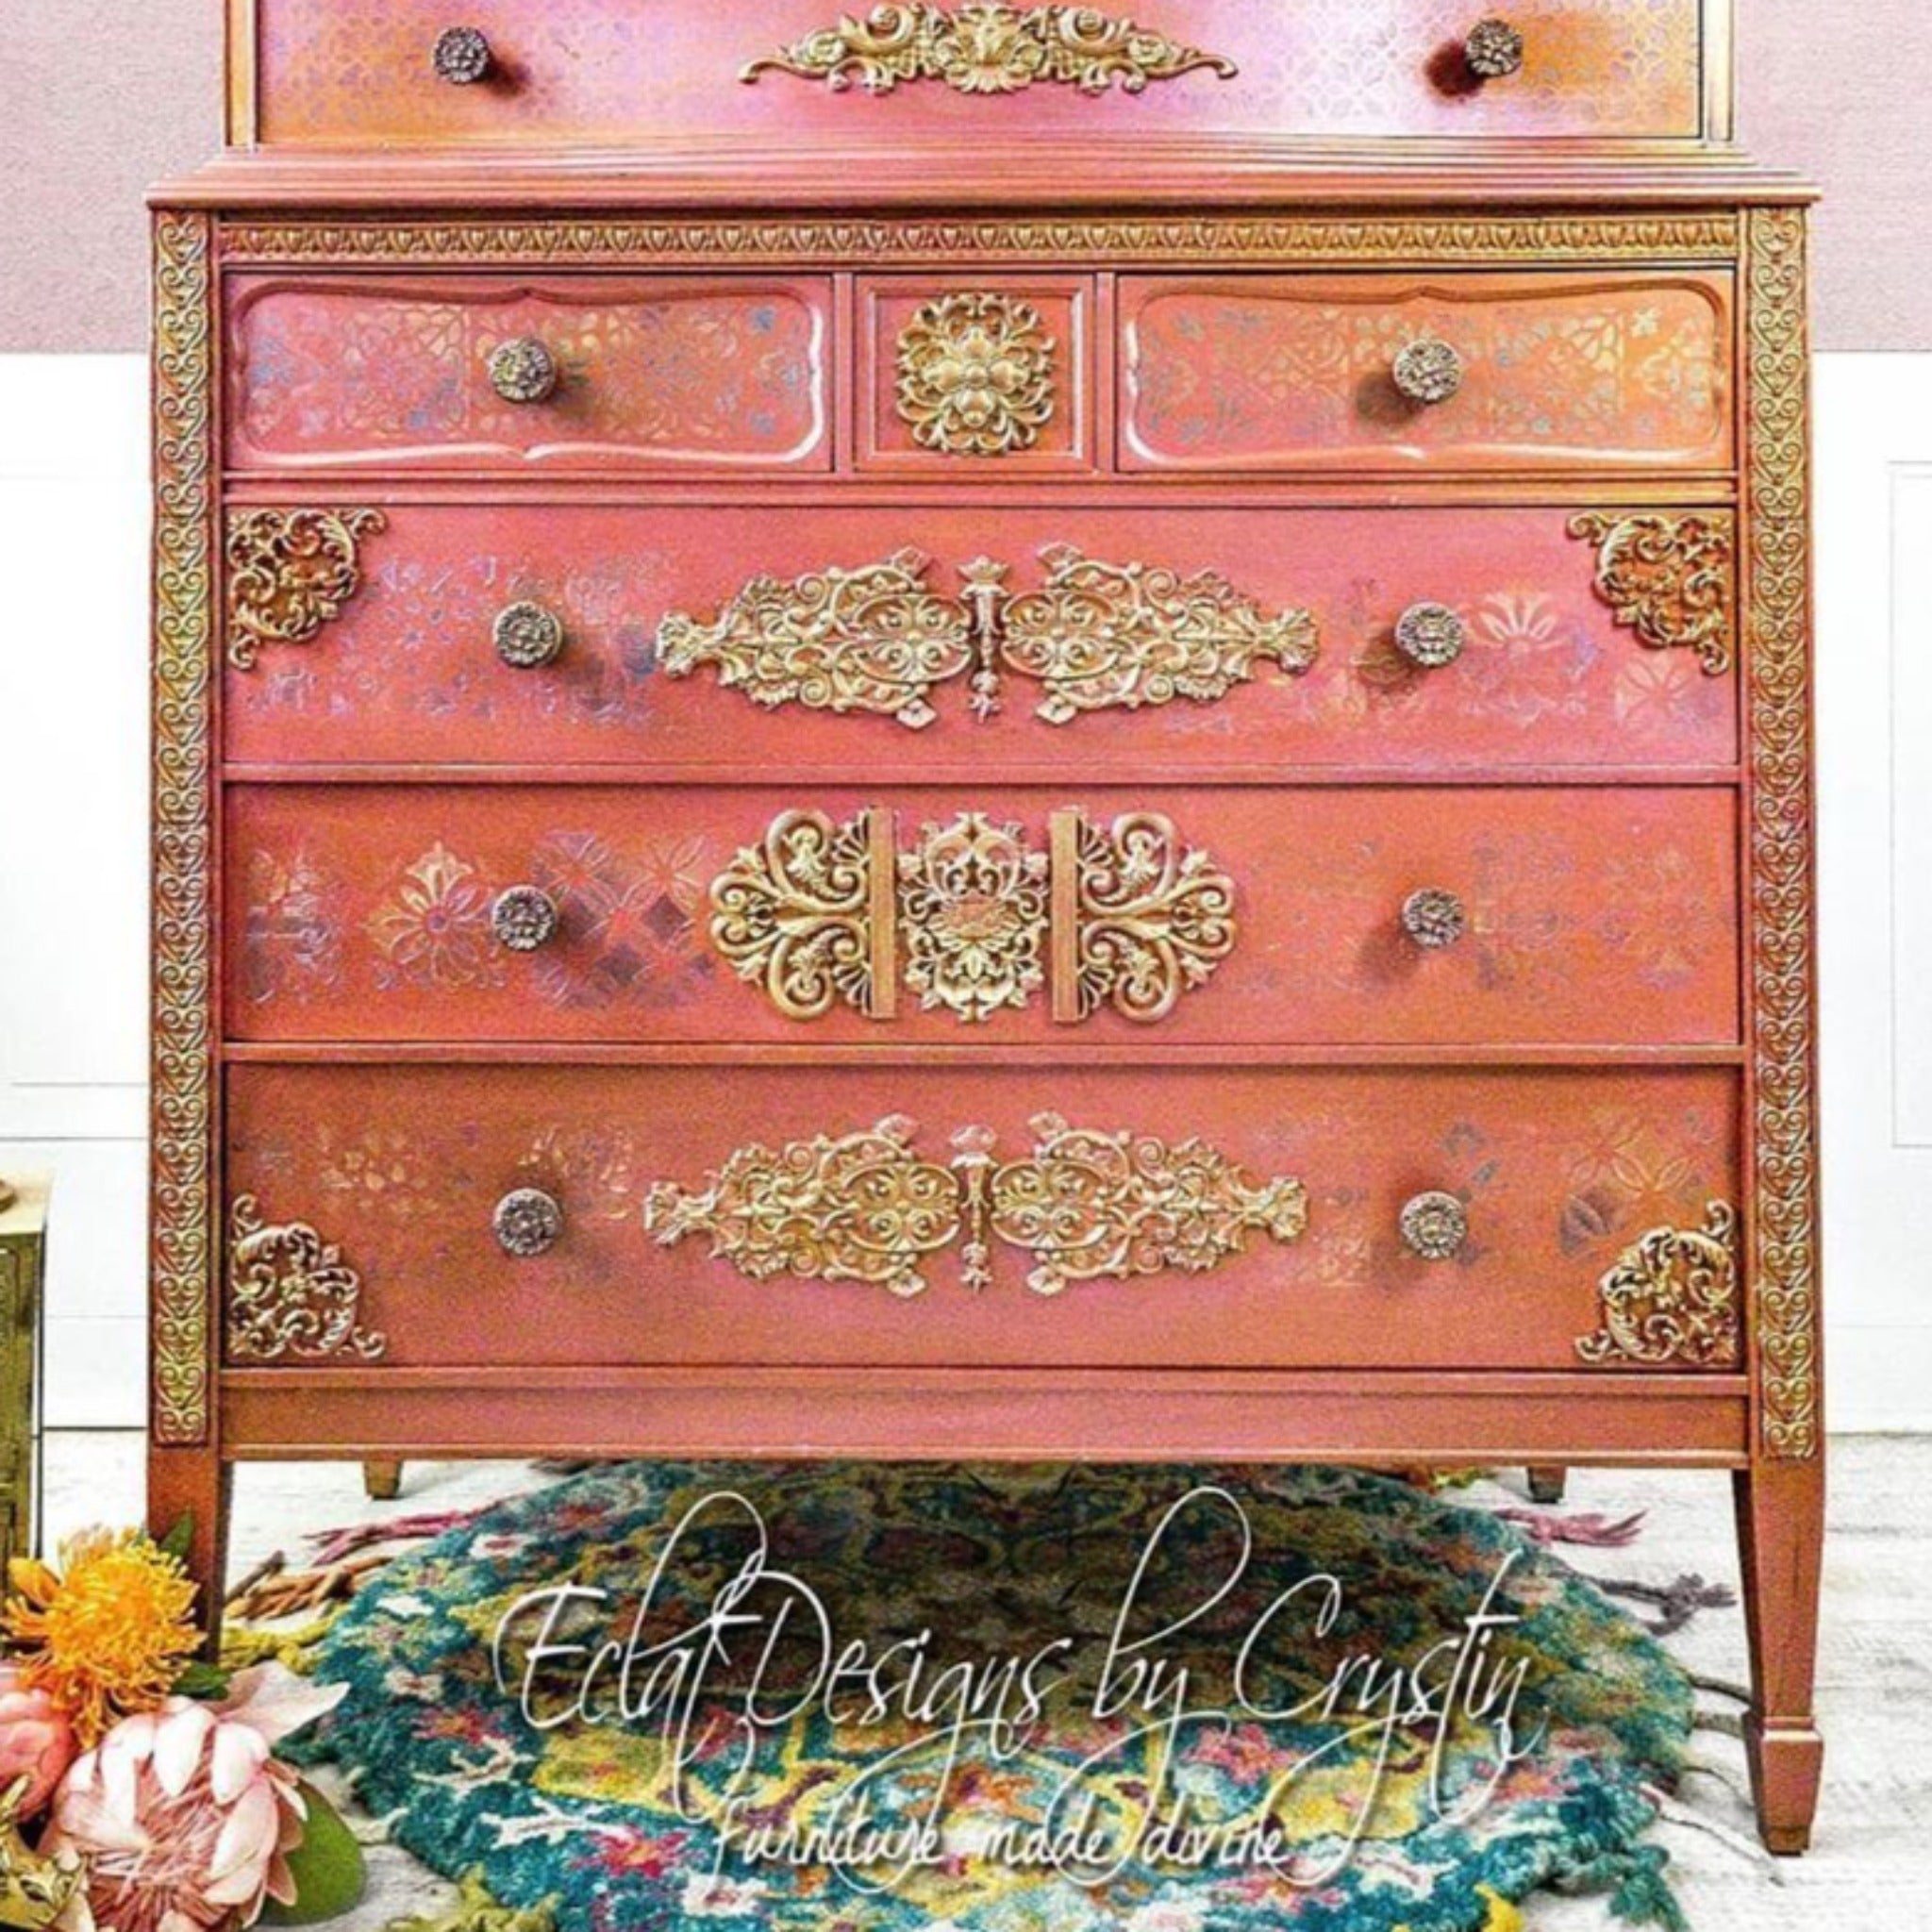 A vintage chest dresser refurbished by Eclat Designs by Crystin is painted coral pink with gold accents and features ReDesign with Prima's Golden Emblem silicone mould on its drawers.